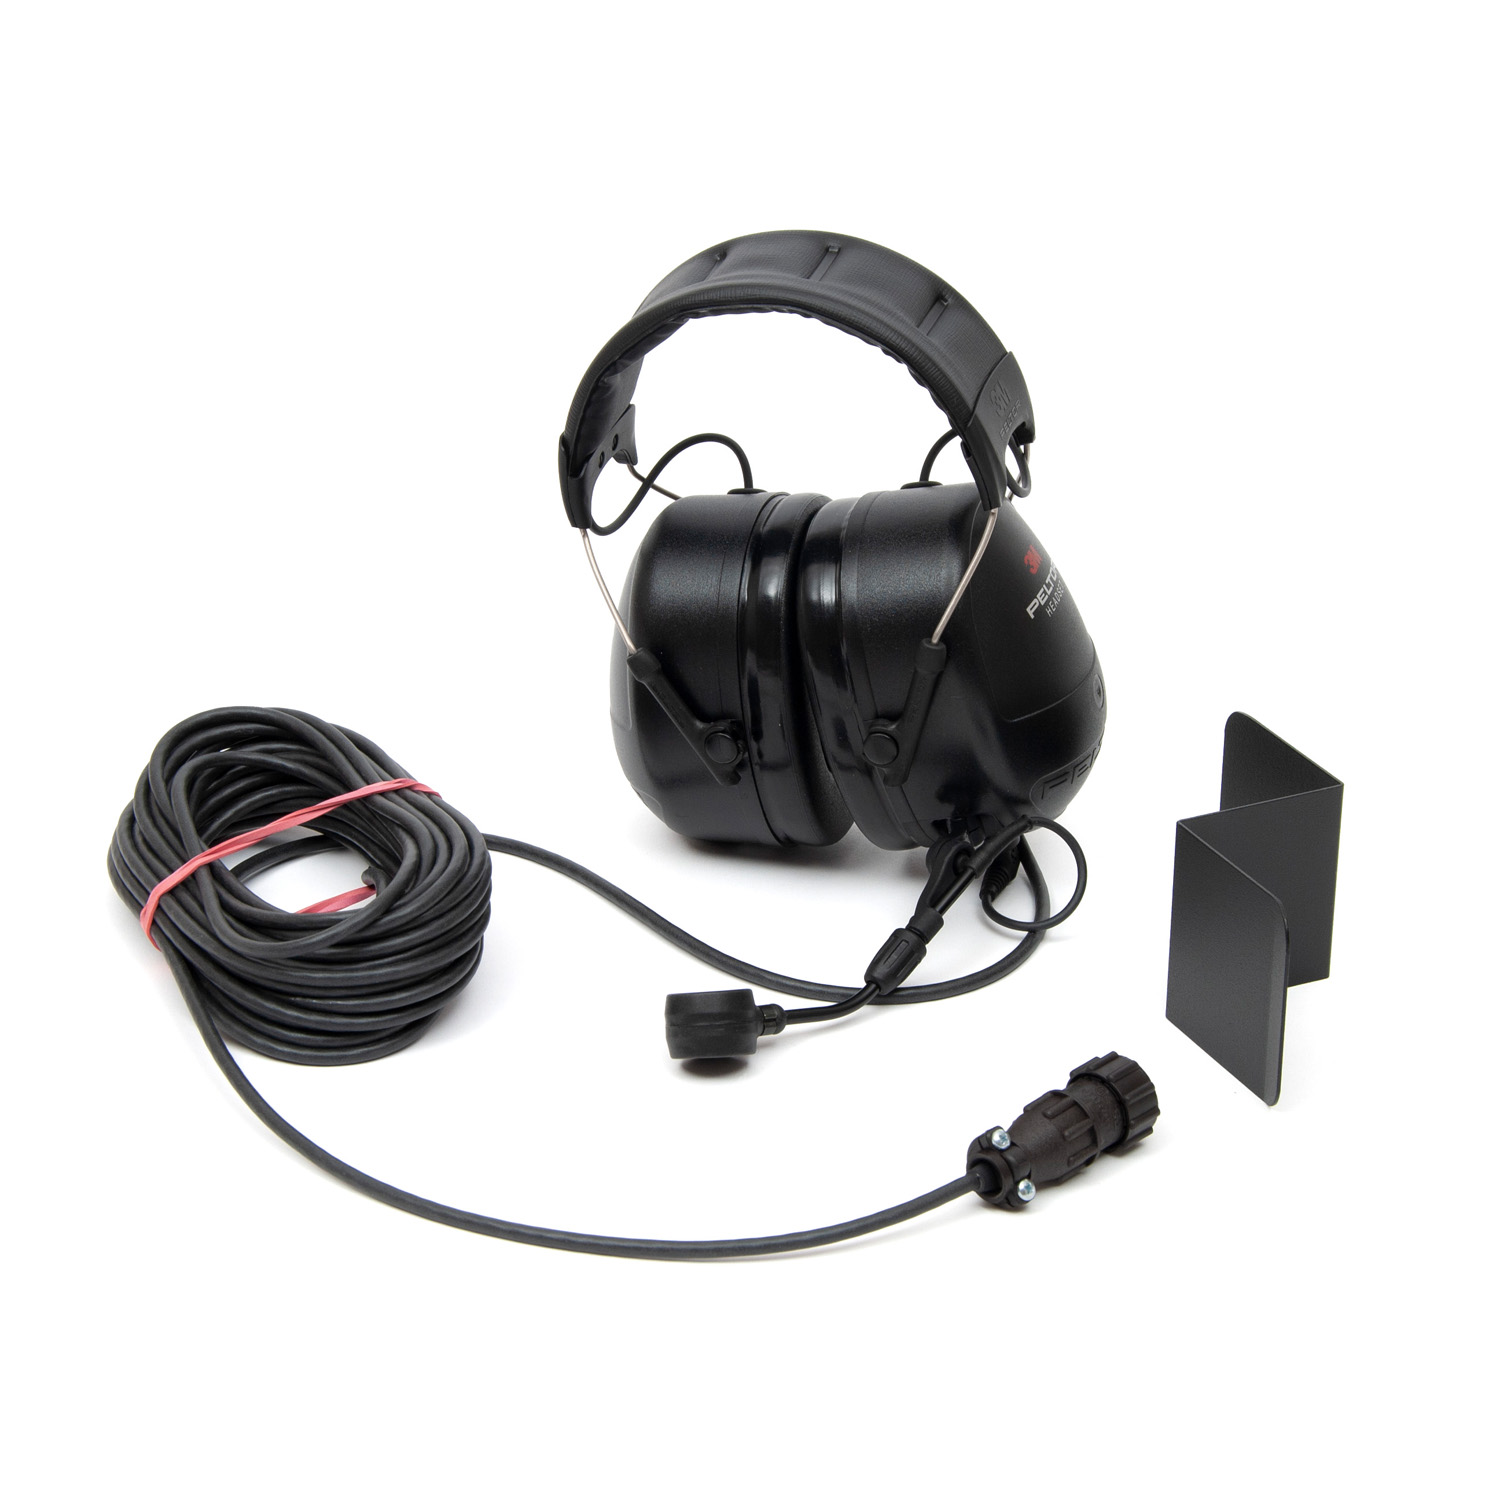 4000011249 P-0005 Headset with 10 m cable and plug